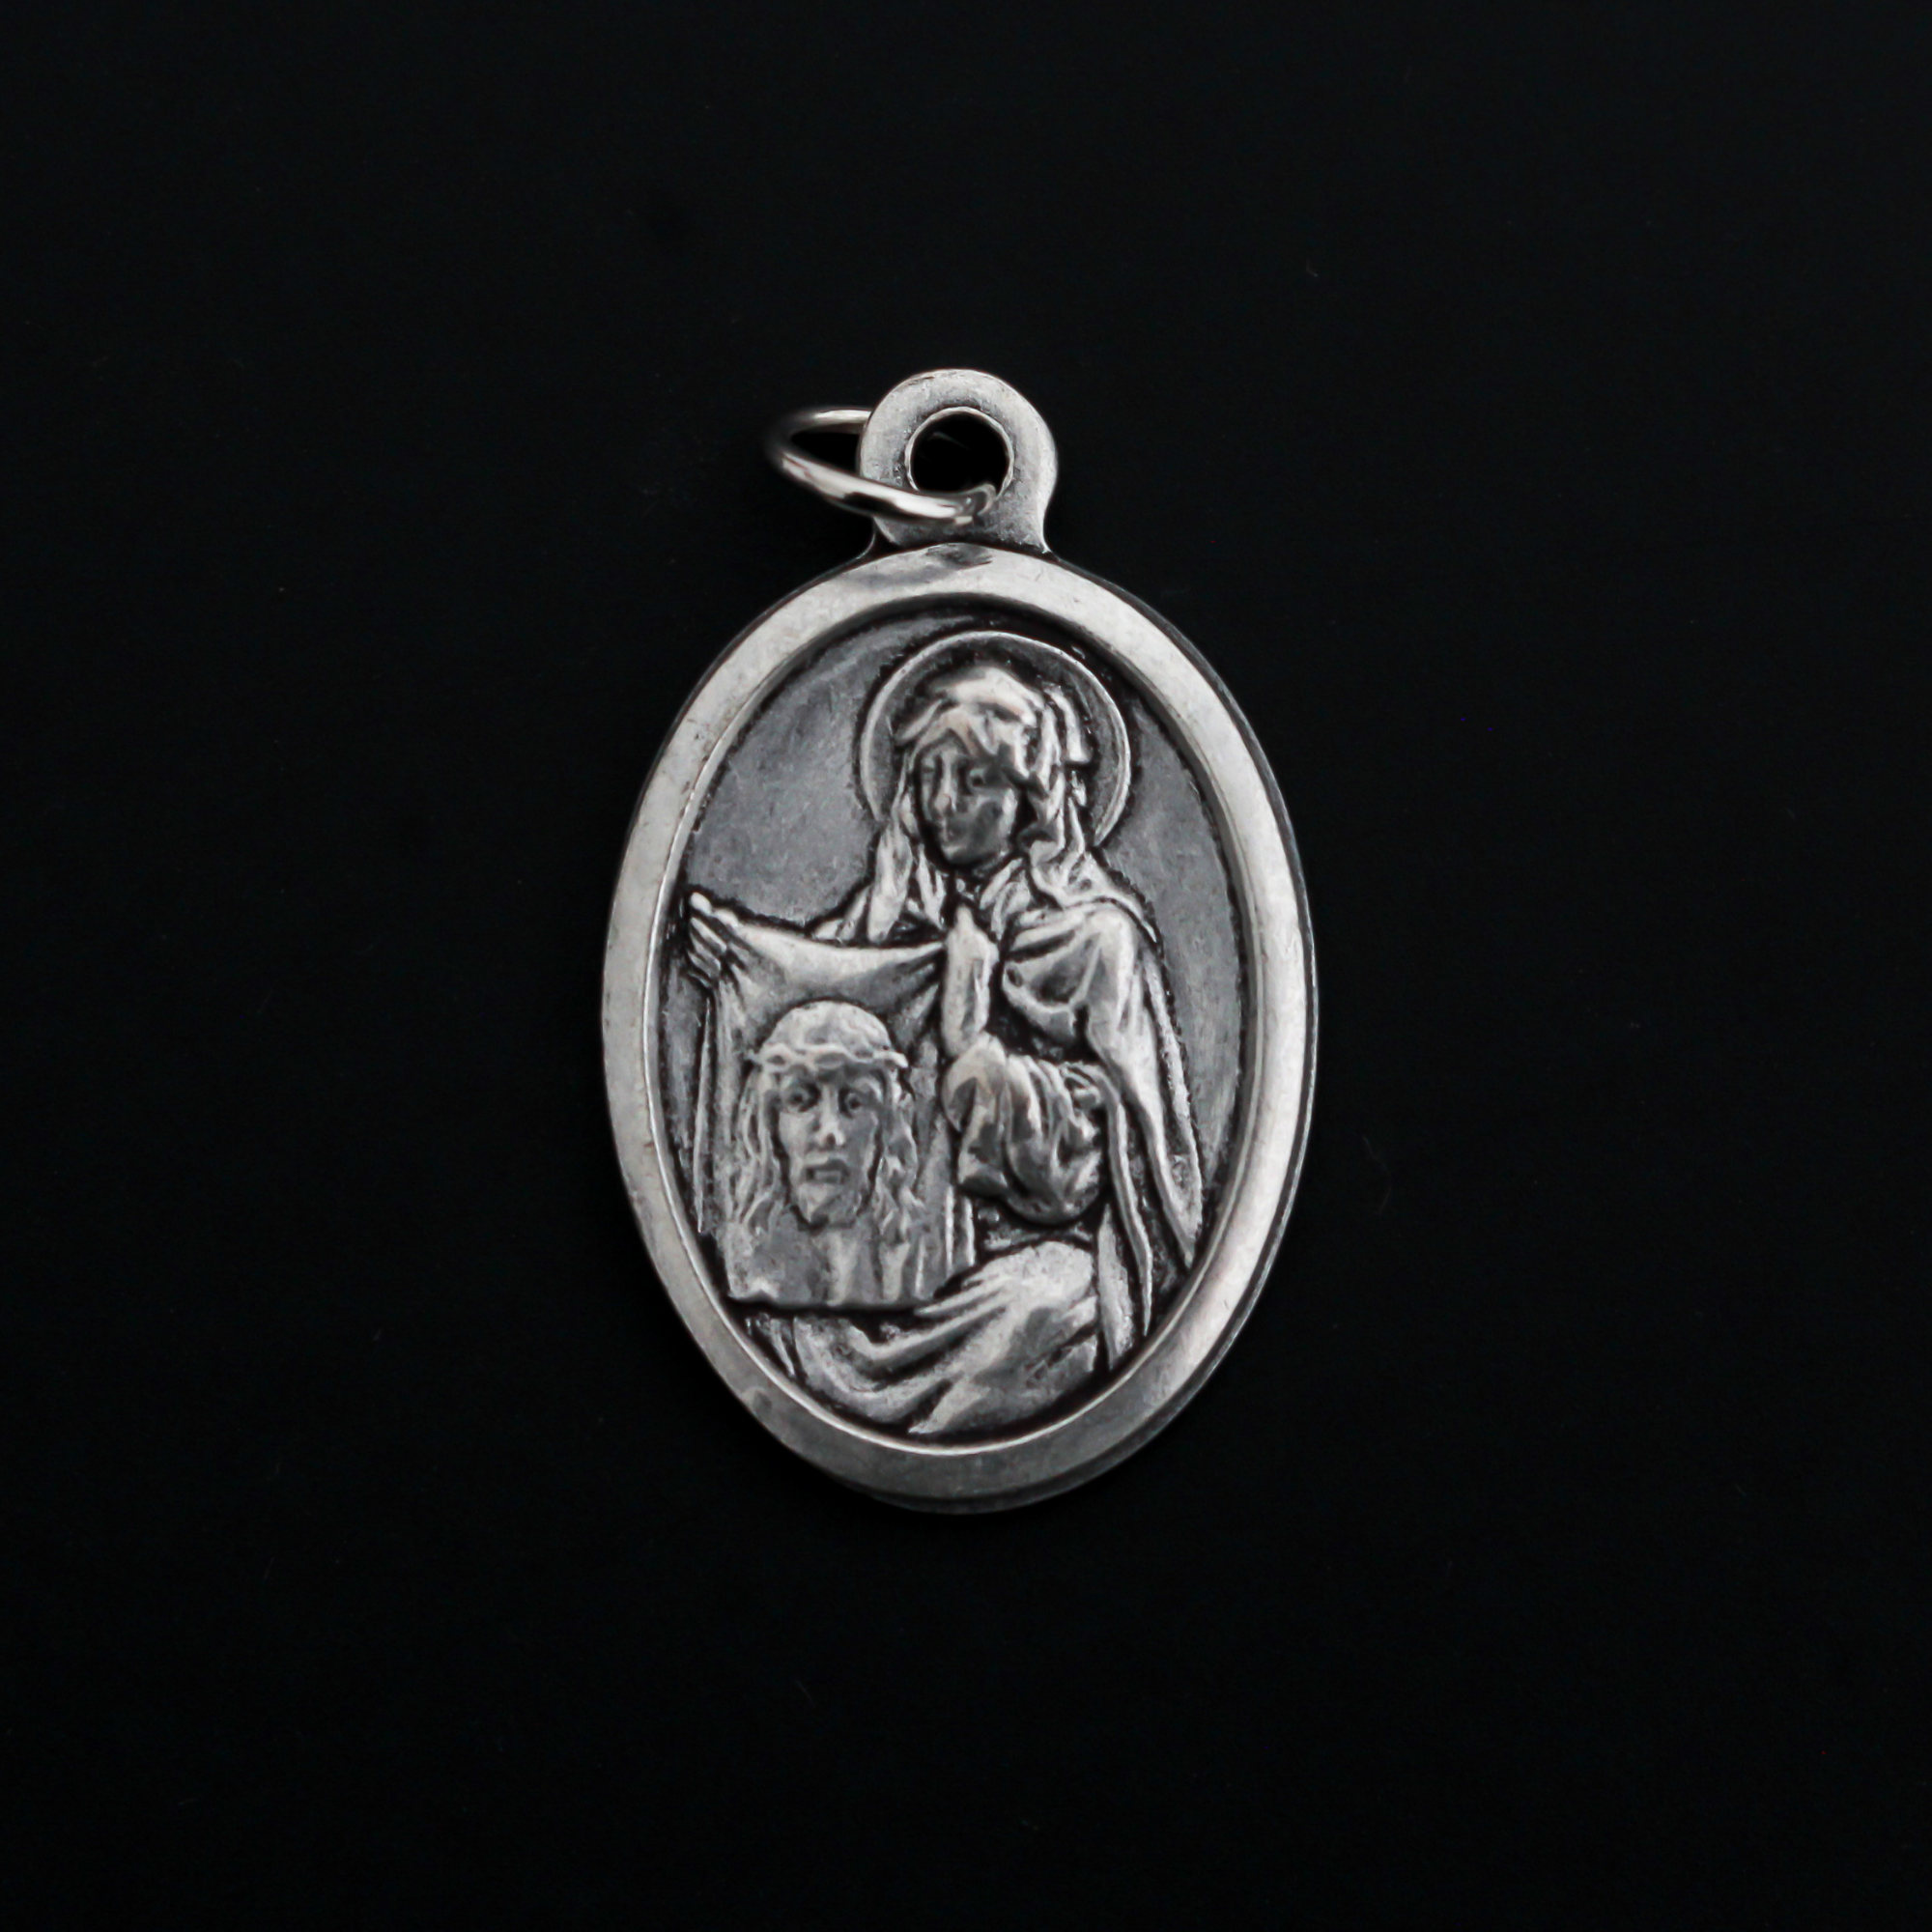 Saint Veronica Medal -  Patron of Photographers and Laundry Workers